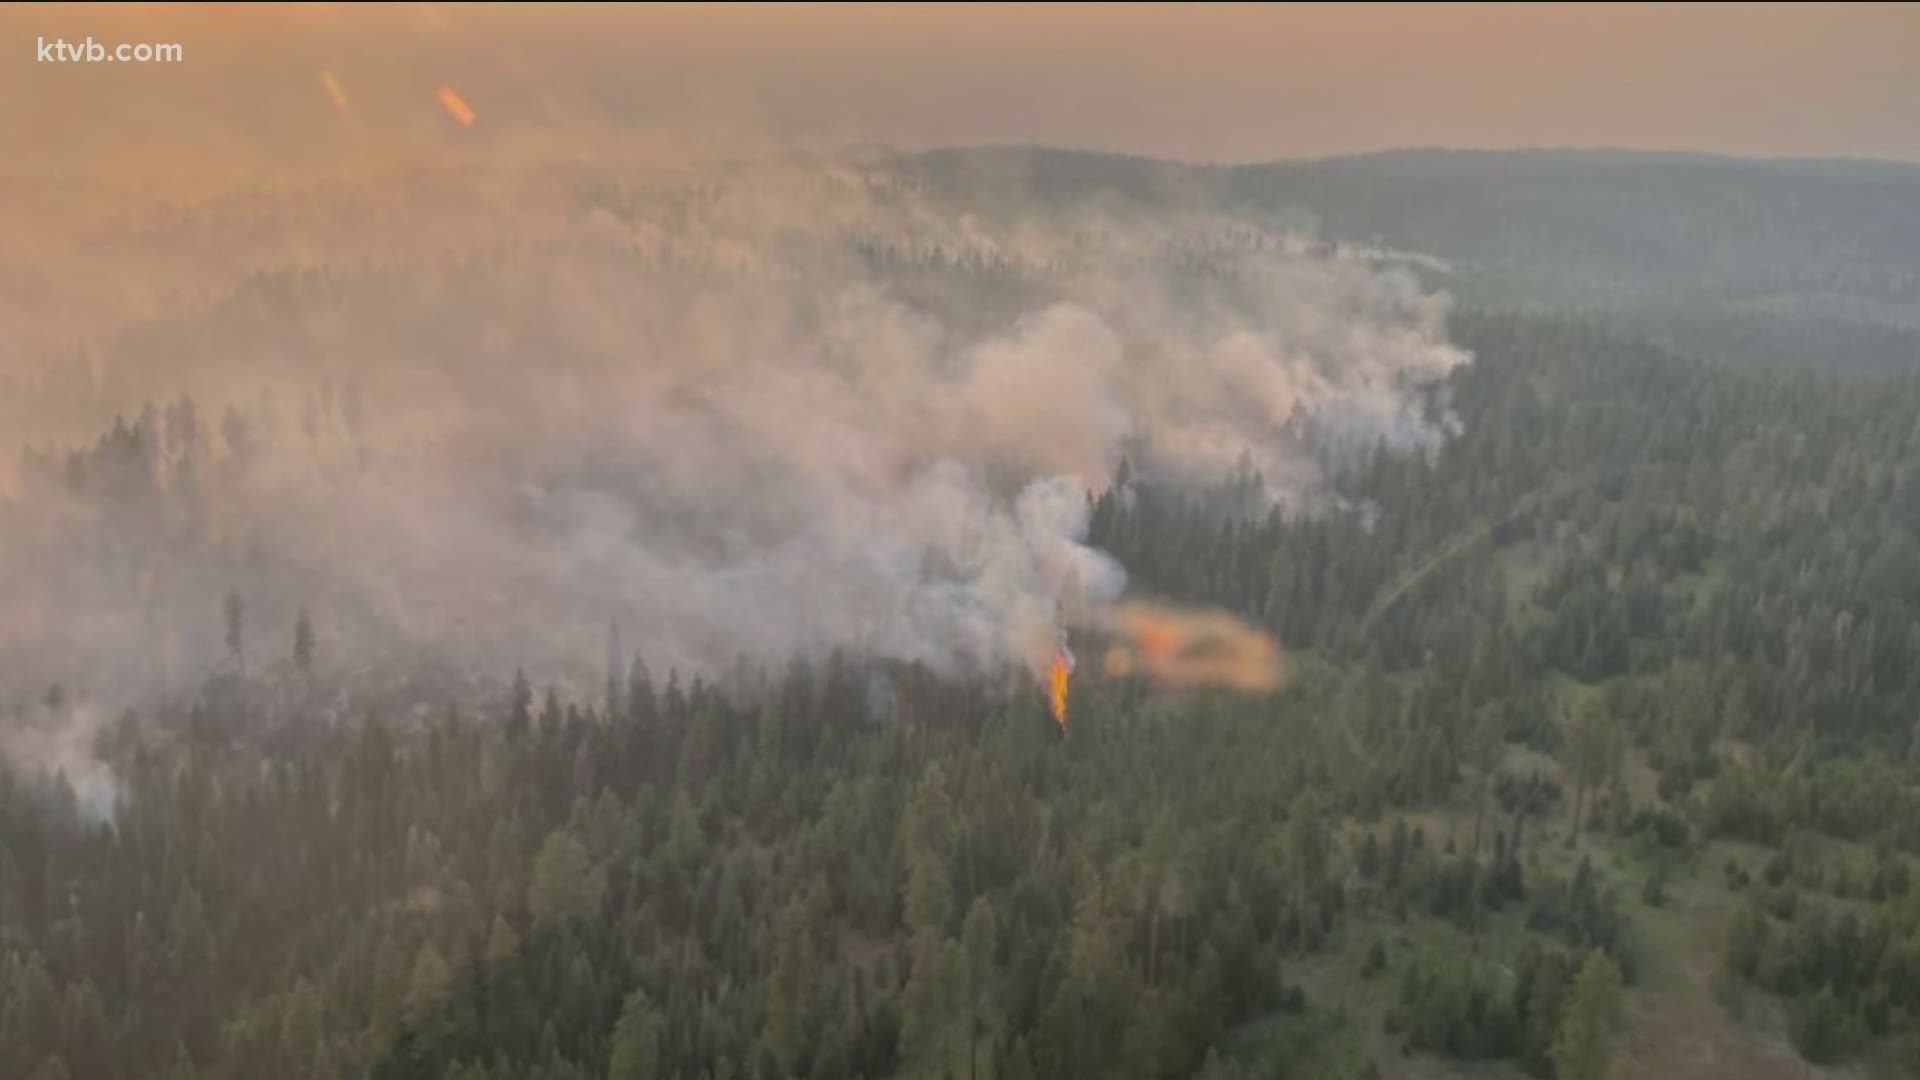 There are lots of fires burning in Idaho and Washington. We have an update on some of them.